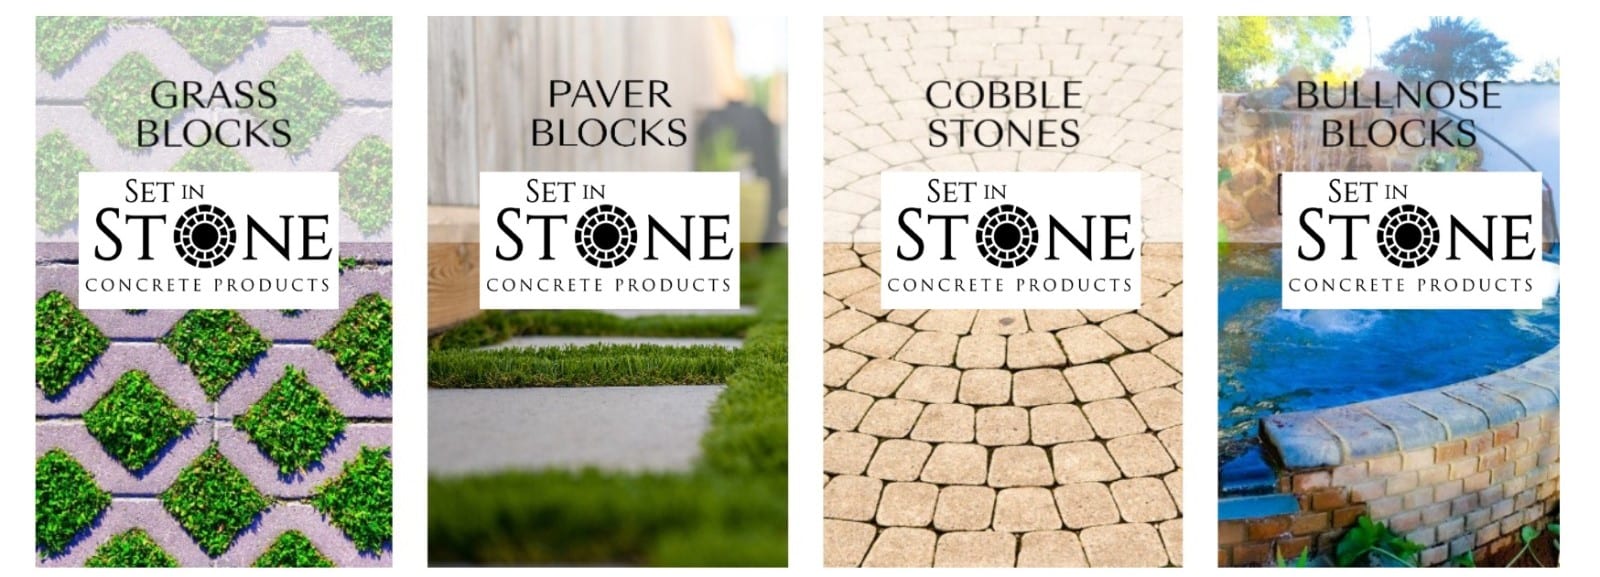 Set in Stone Concrete Products 5